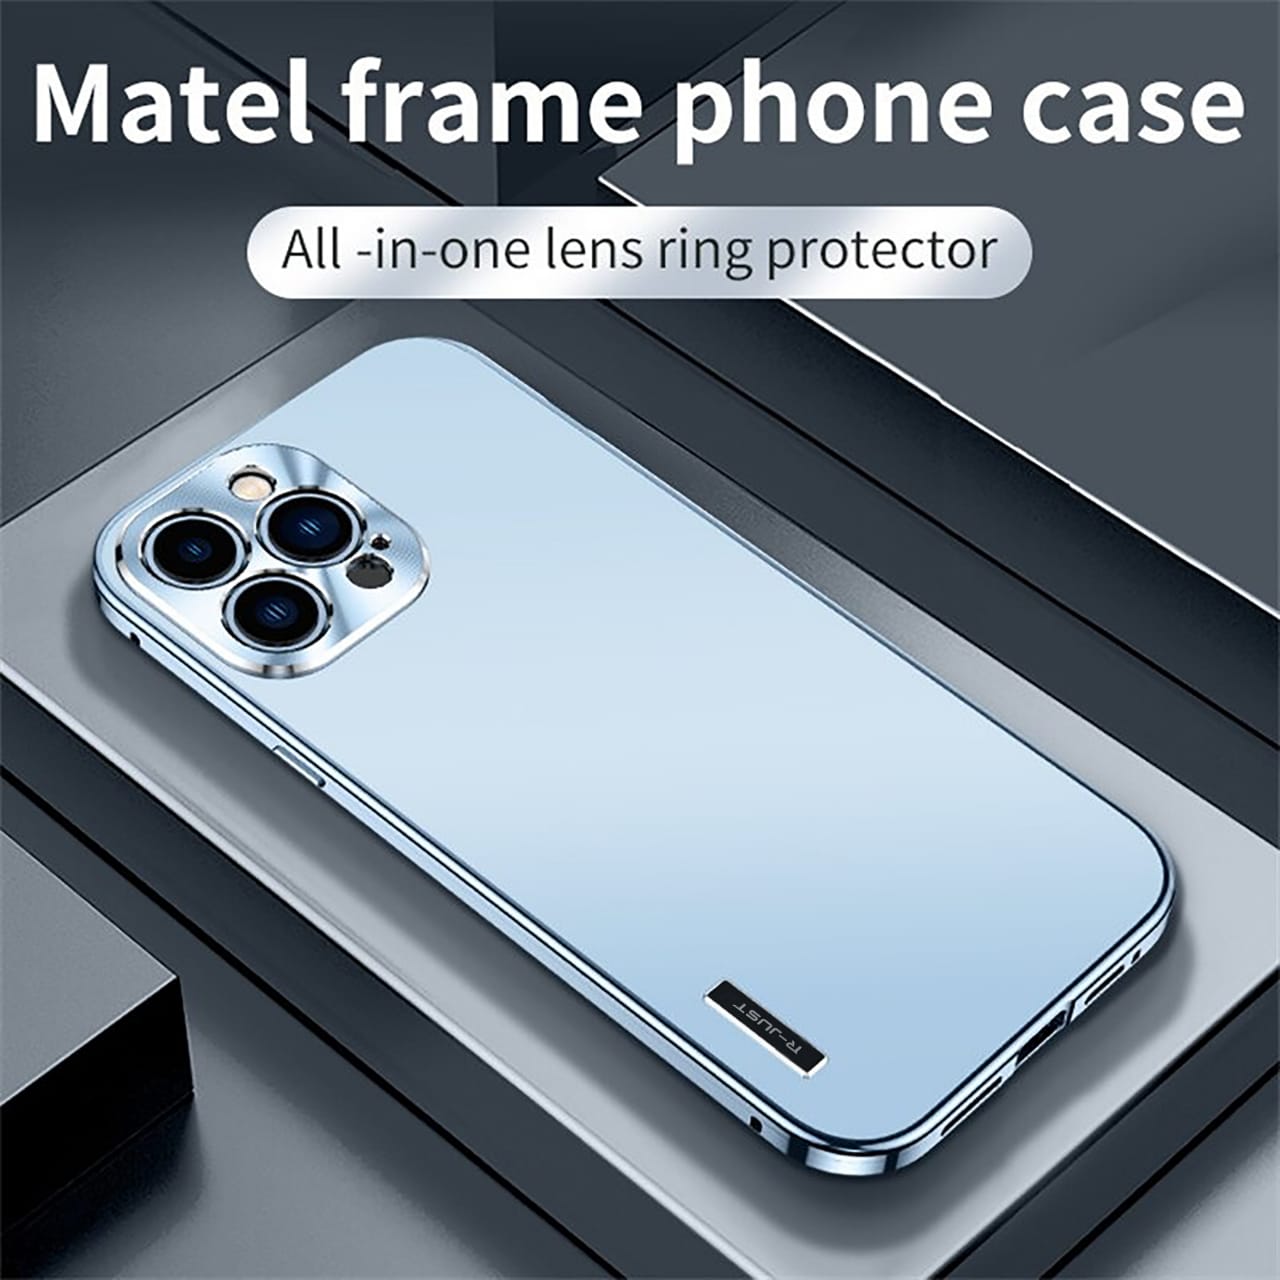 Luxury aluminum alloy metal magnetic protective case for iPhone - Limitless 3.0 - sky-case